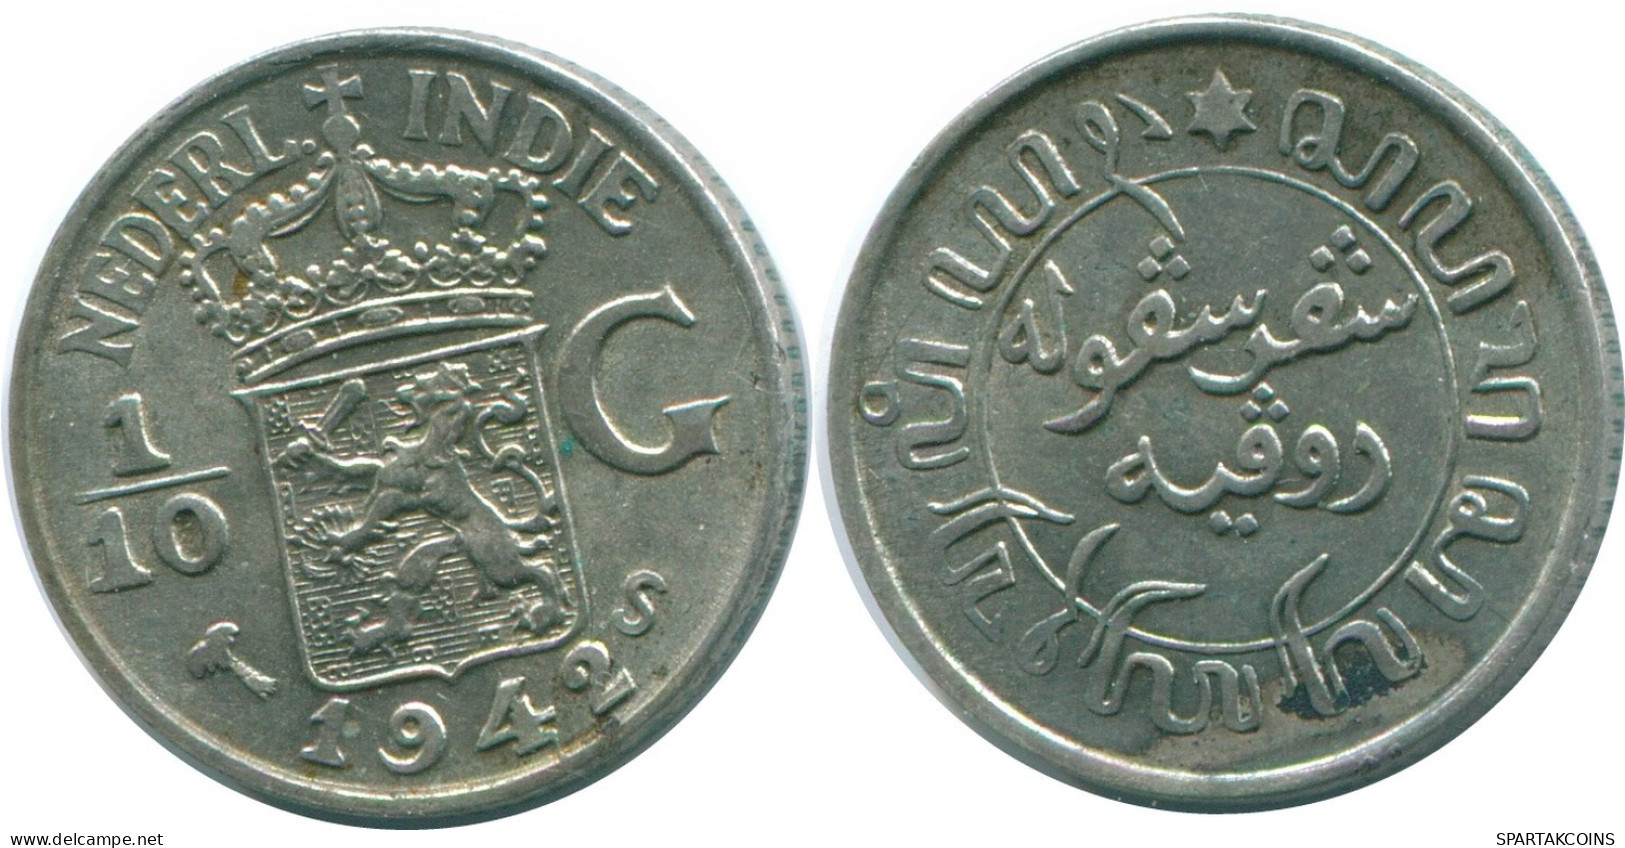 1/10 GULDEN 1942 NETHERLANDS EAST INDIES SILVER Colonial Coin #NL13919.3.U.A - Dutch East Indies